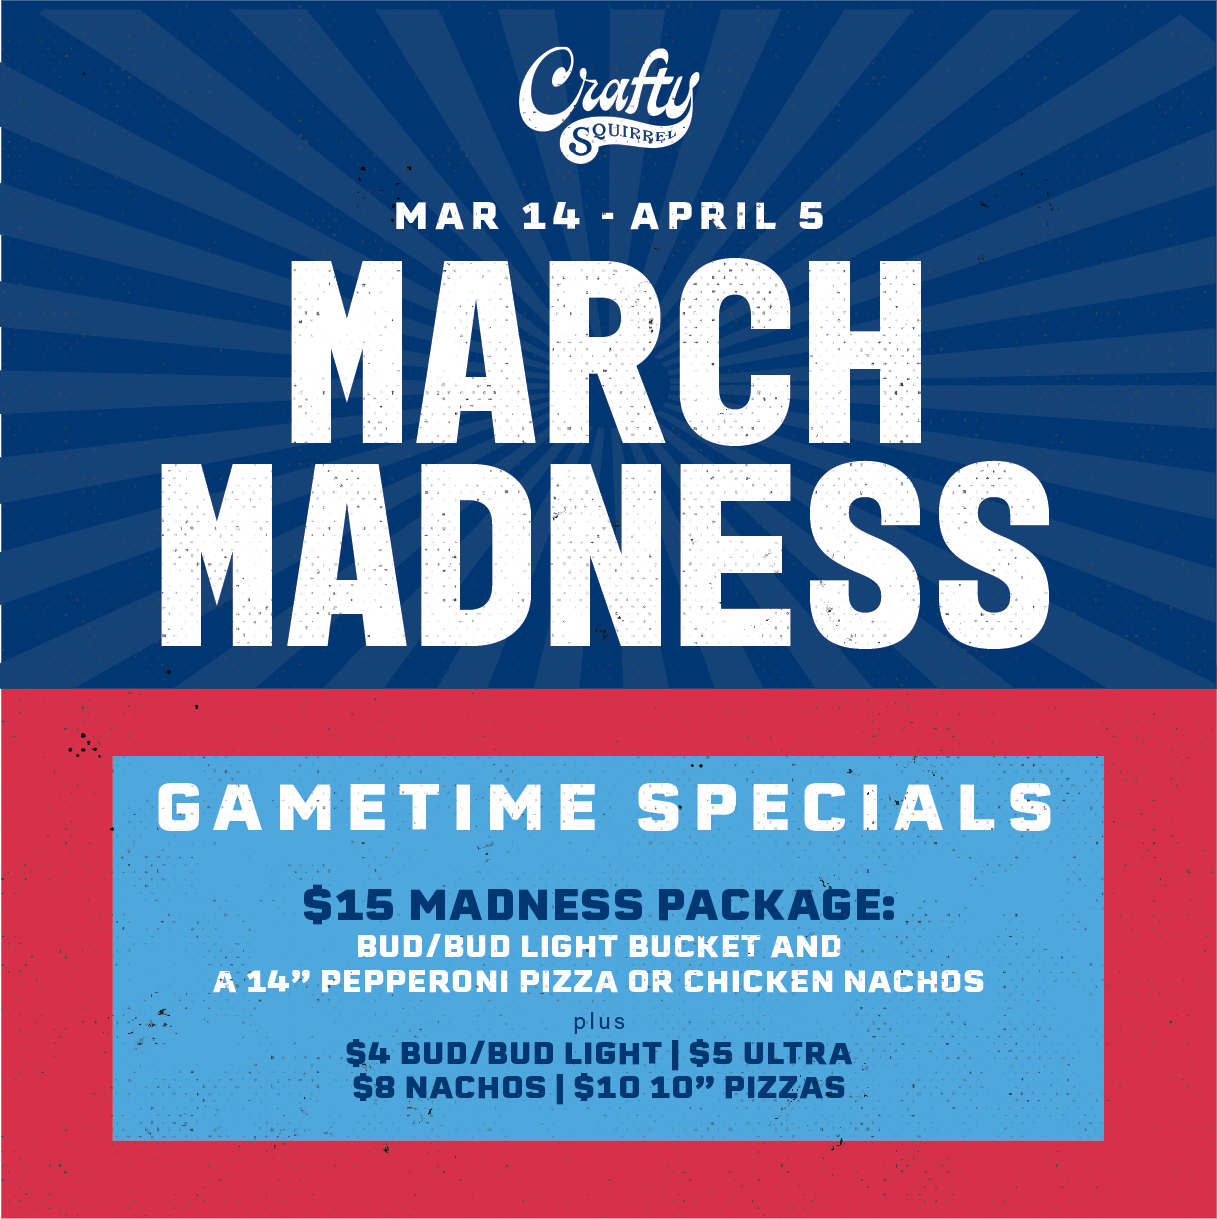 March Madness at the Crafty Squirrel